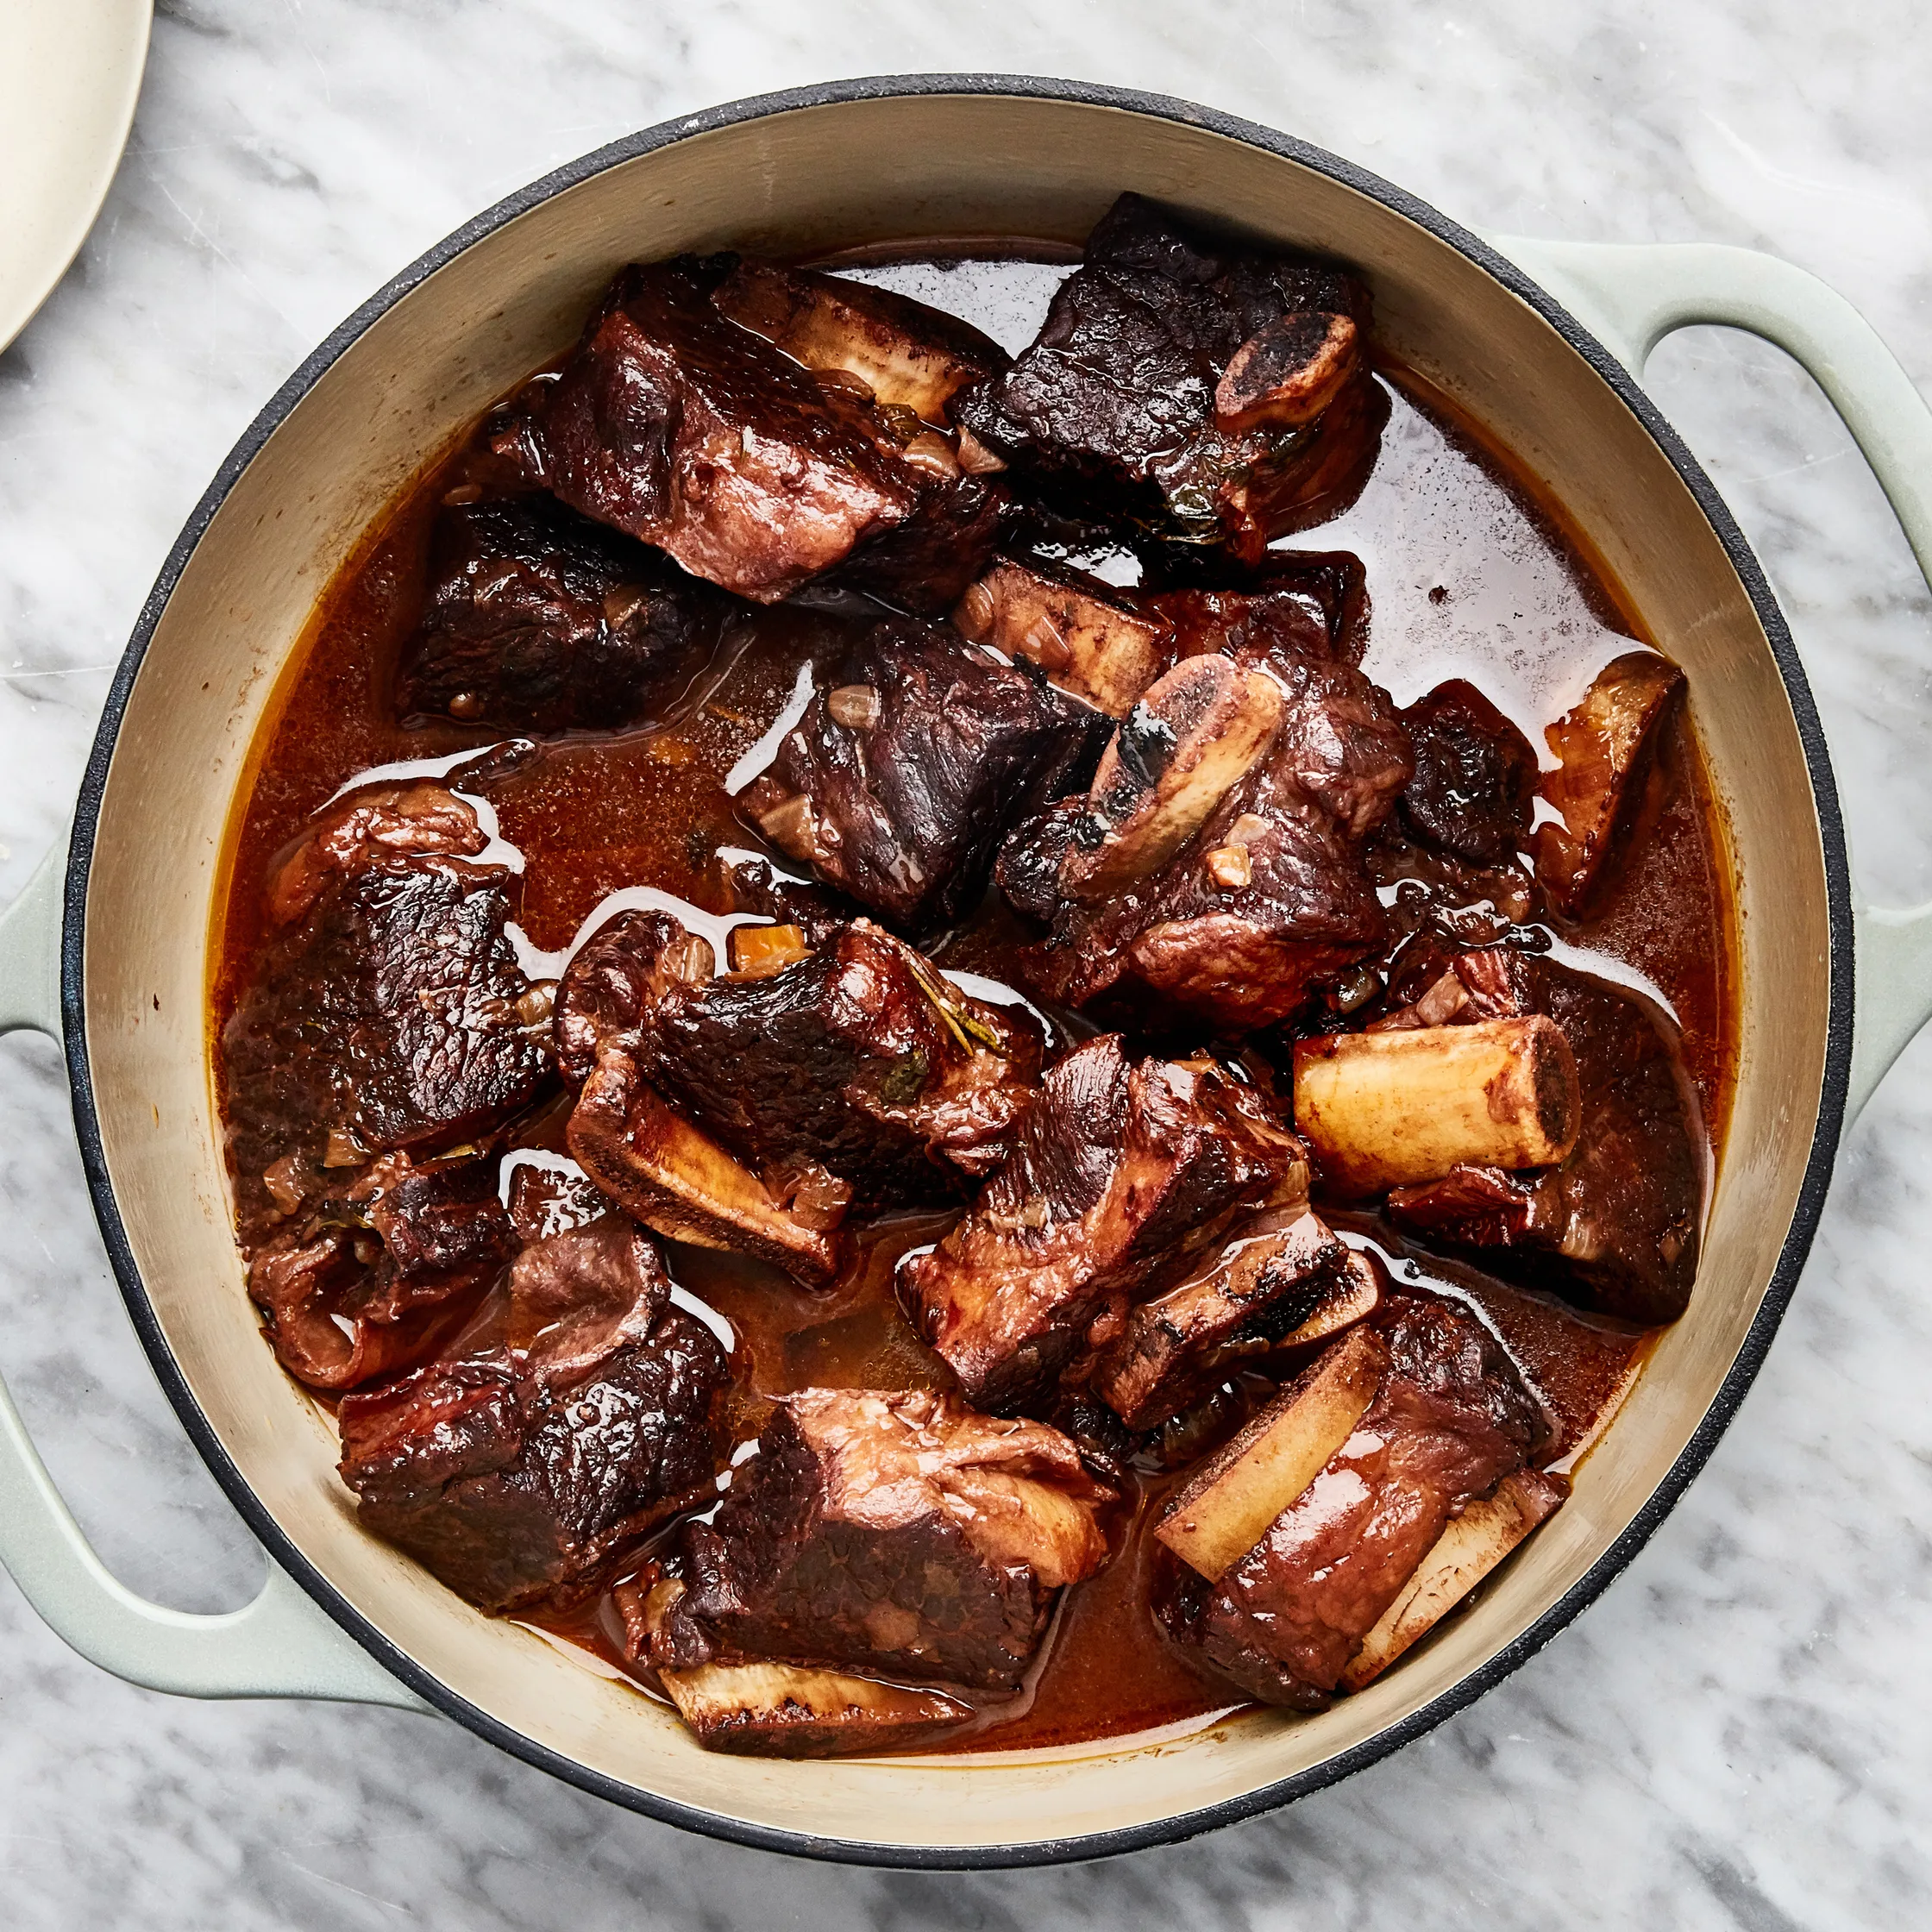 Image of red wine braised beef short ribs